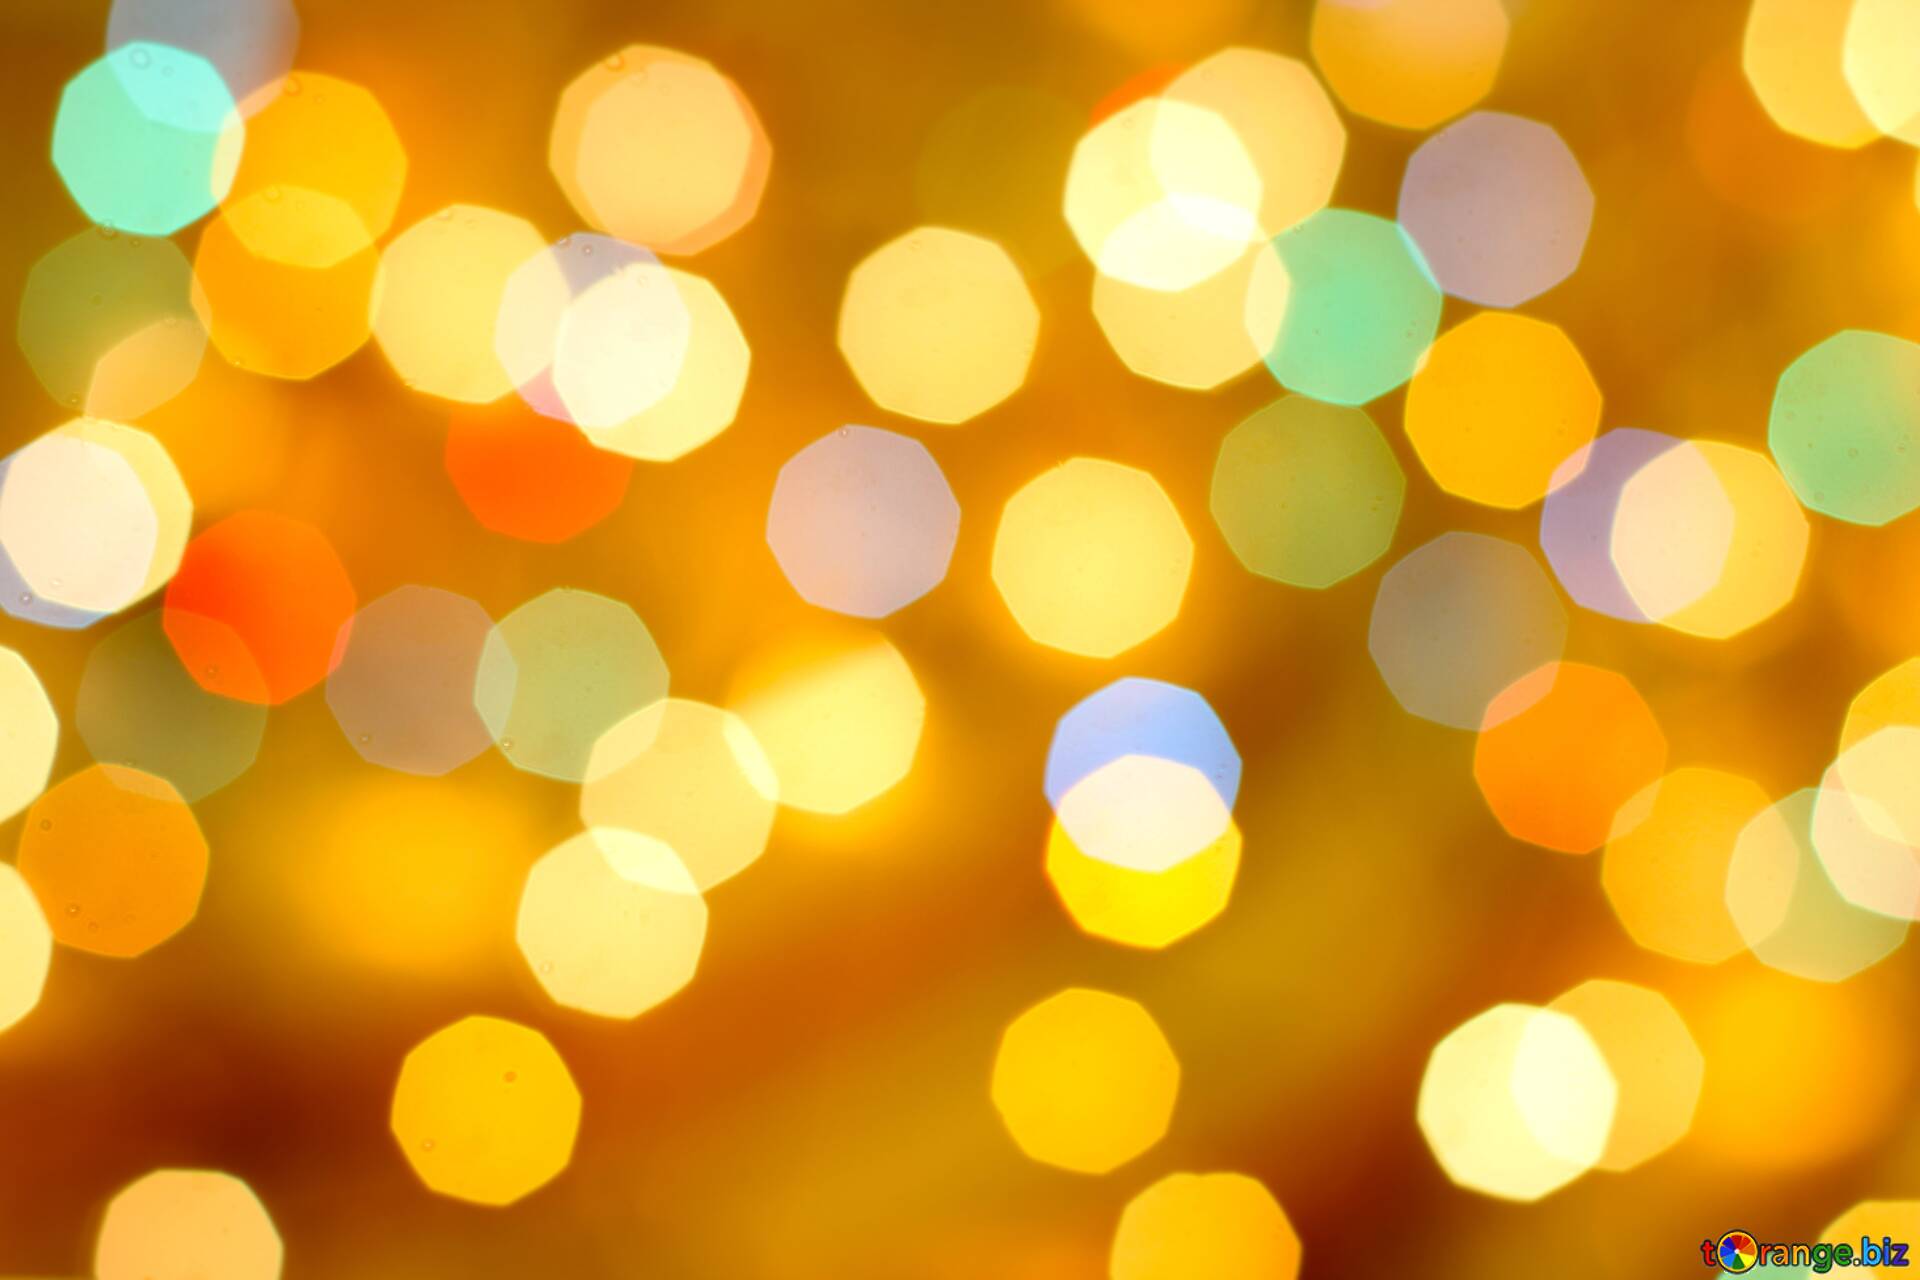 Download free picture Yellow color. Background of bright lights. on CC-BY  License ~ Free Image Stock  ~ fx №587